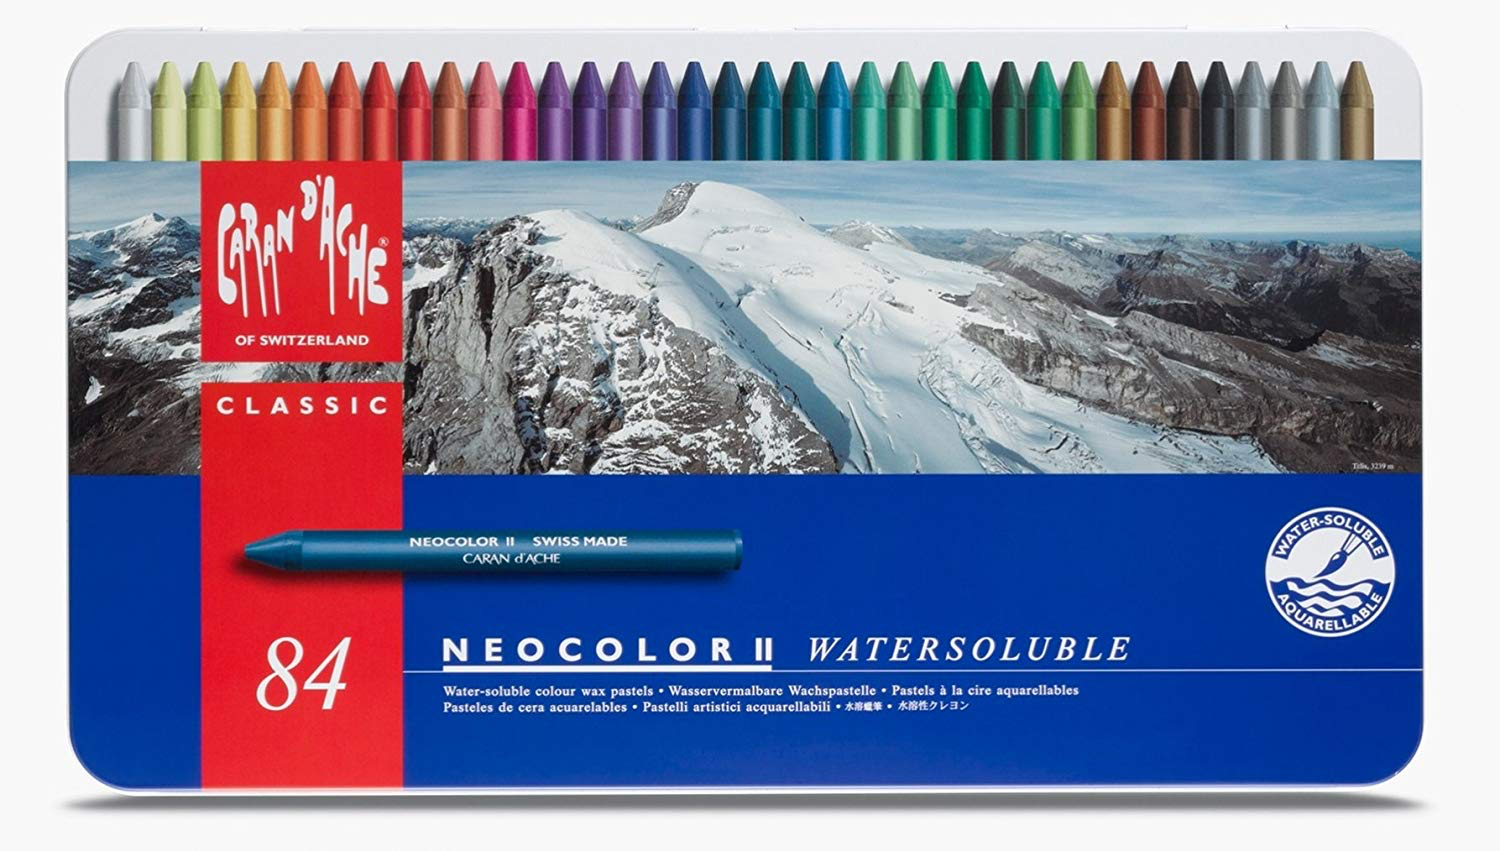 NEOCOLOR II Water-soluble assortment of 84 Colours